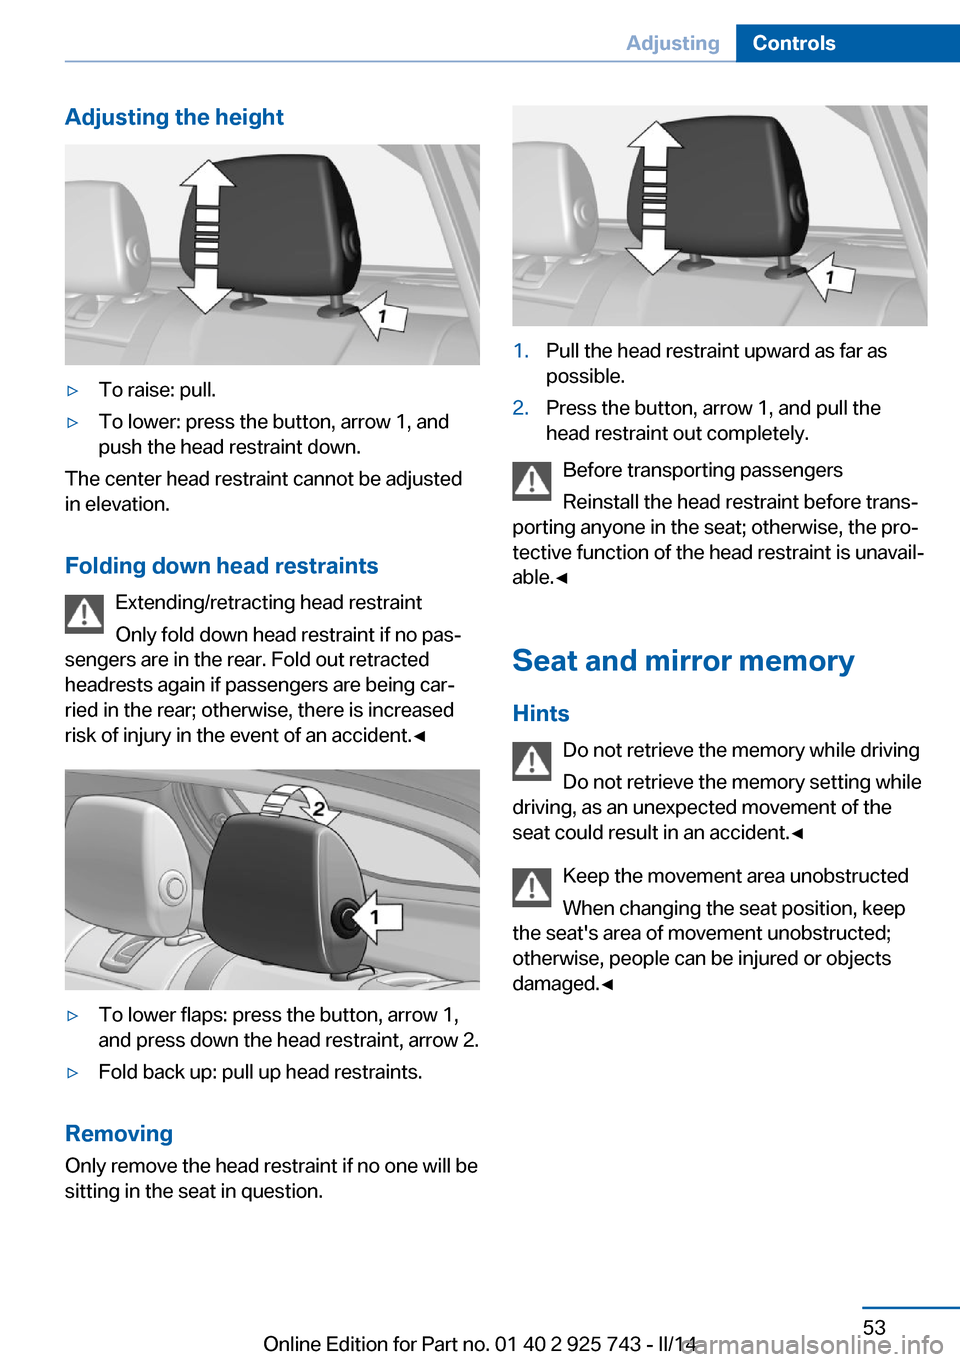 BMW 3 SERIES SEDAN 2014 F30 Owners Manual Adjusting the height▷To raise: pull.▷To lower: press the button, arrow 1, and
push the head restraint down.
The center head restraint cannot be adjusted
in elevation.
Folding down head restraints 